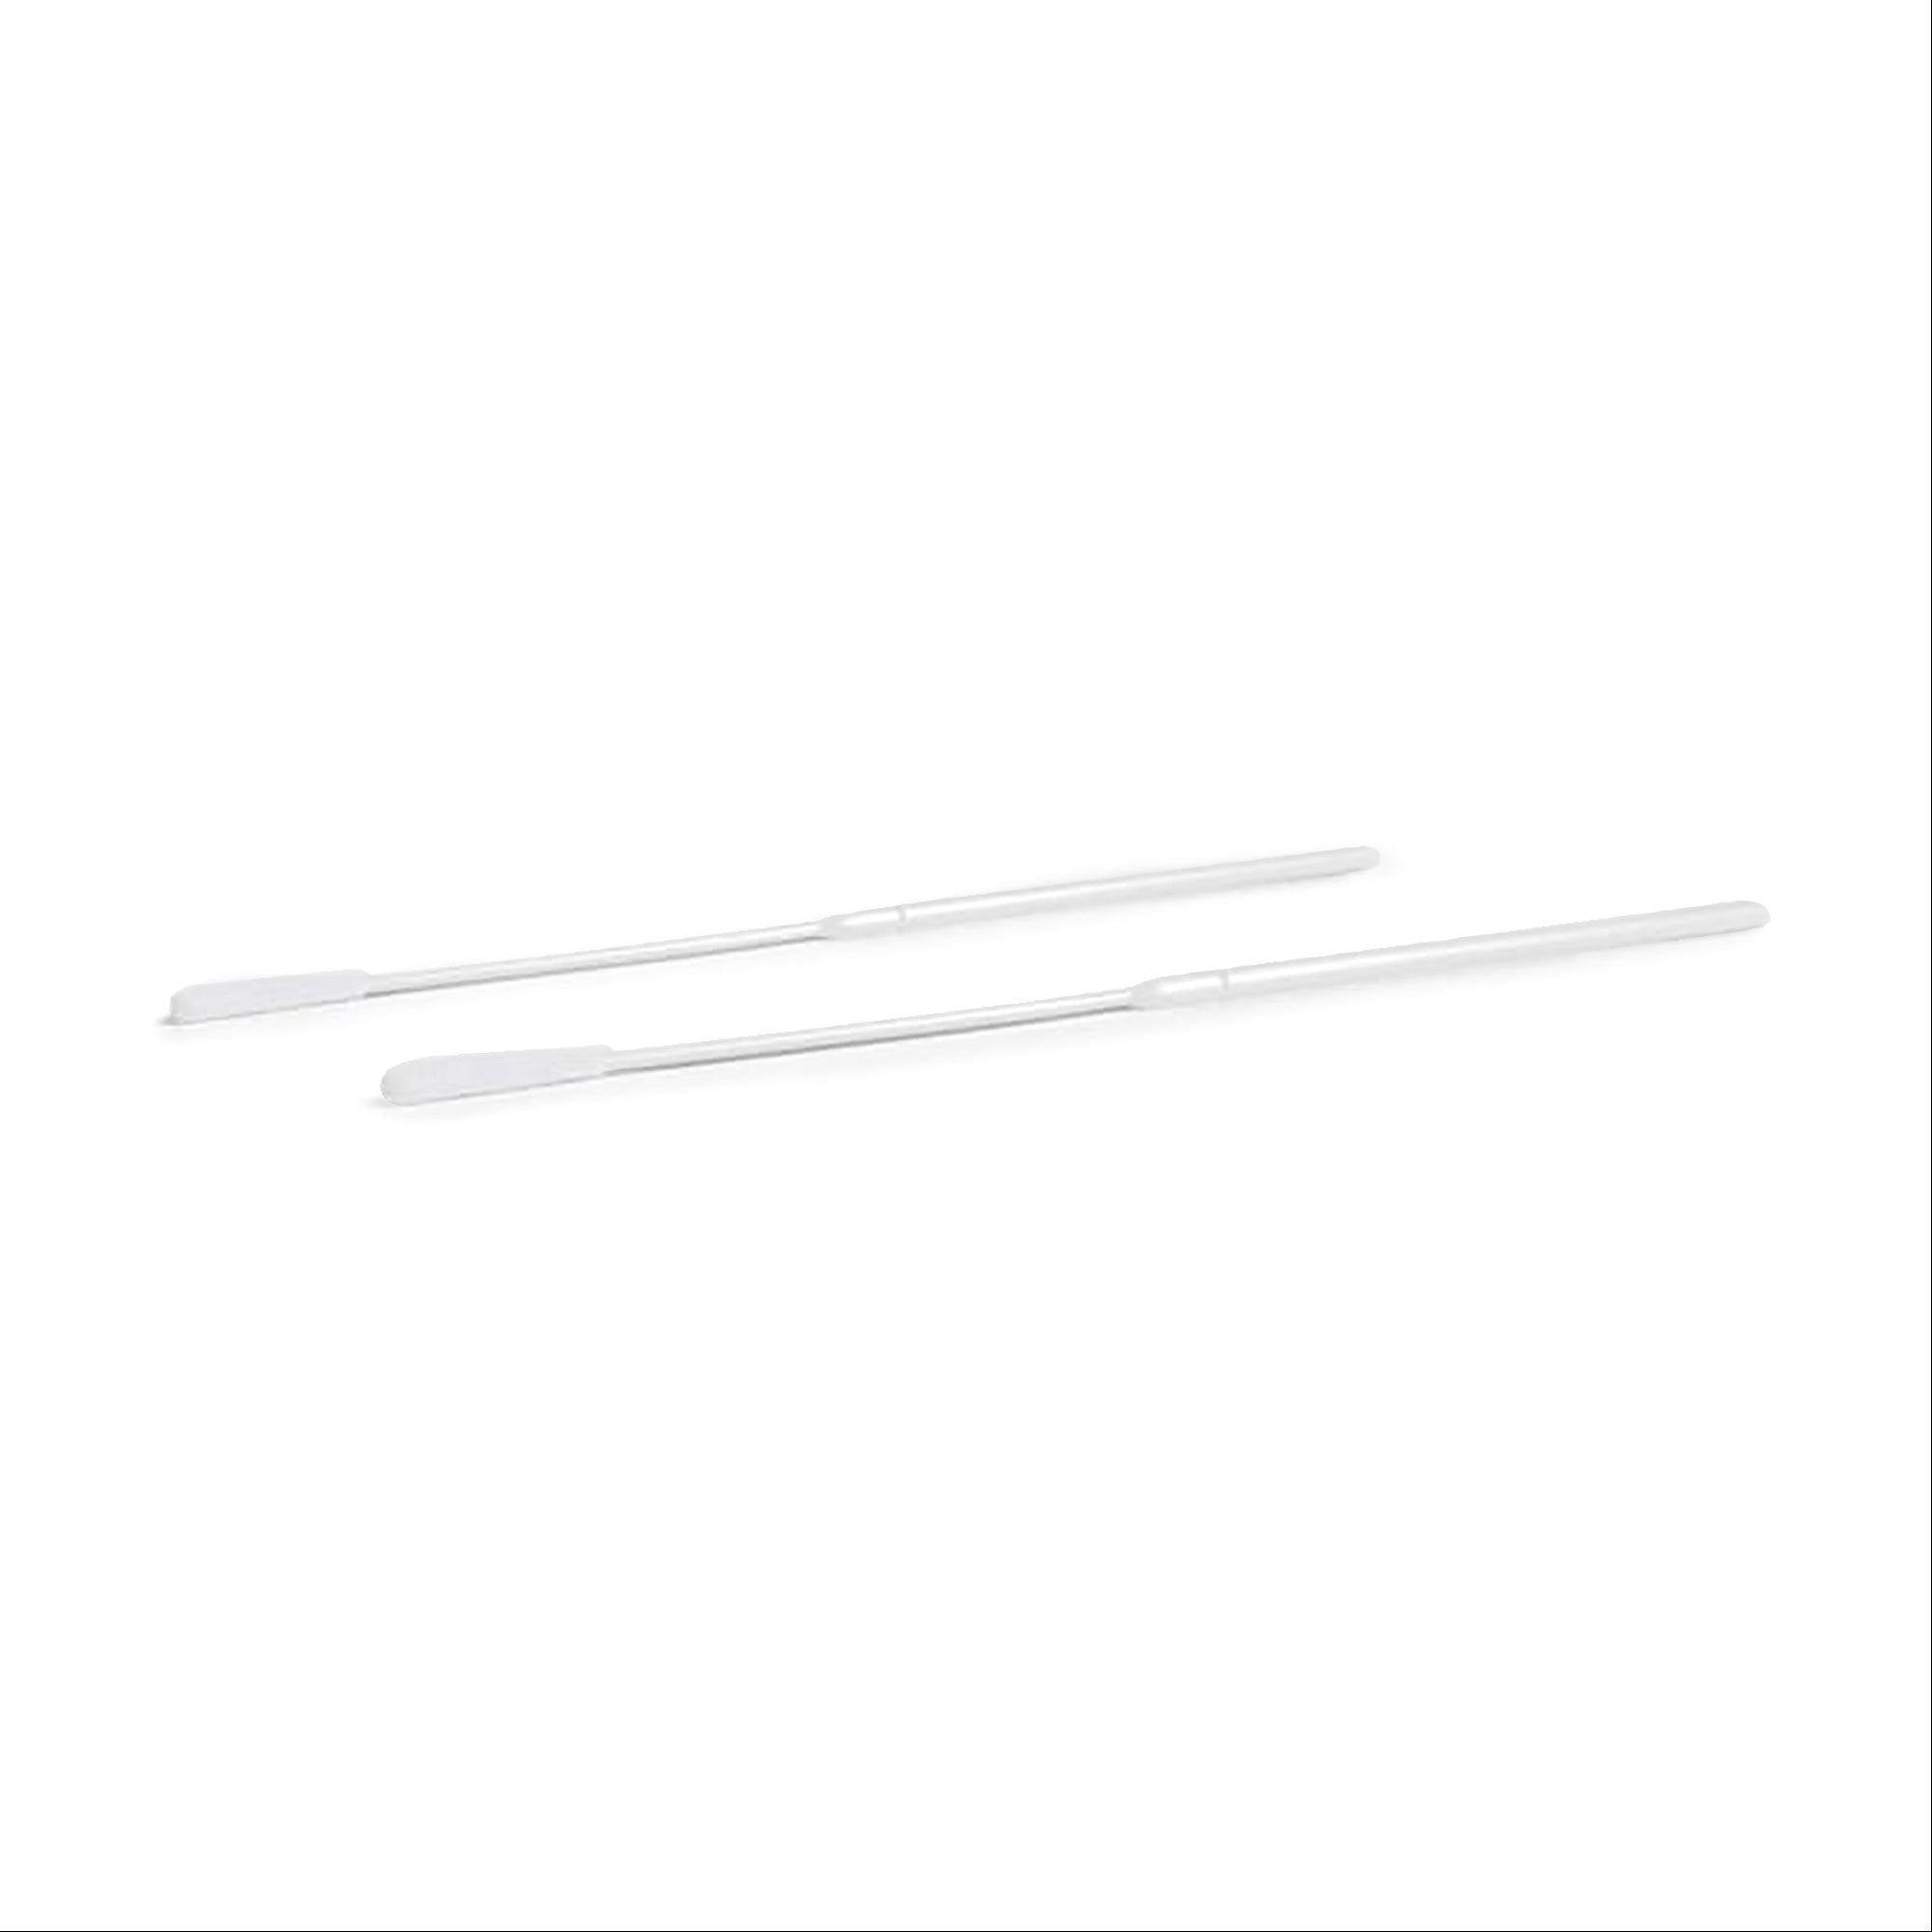 Typenex Nasopharyngeal Specimen Collection Swab Typenex Nasopharyngeal Specimen Collection Swab • Sterile • Individually Wrapped ,200 / pk - Axiom Medical Supplies